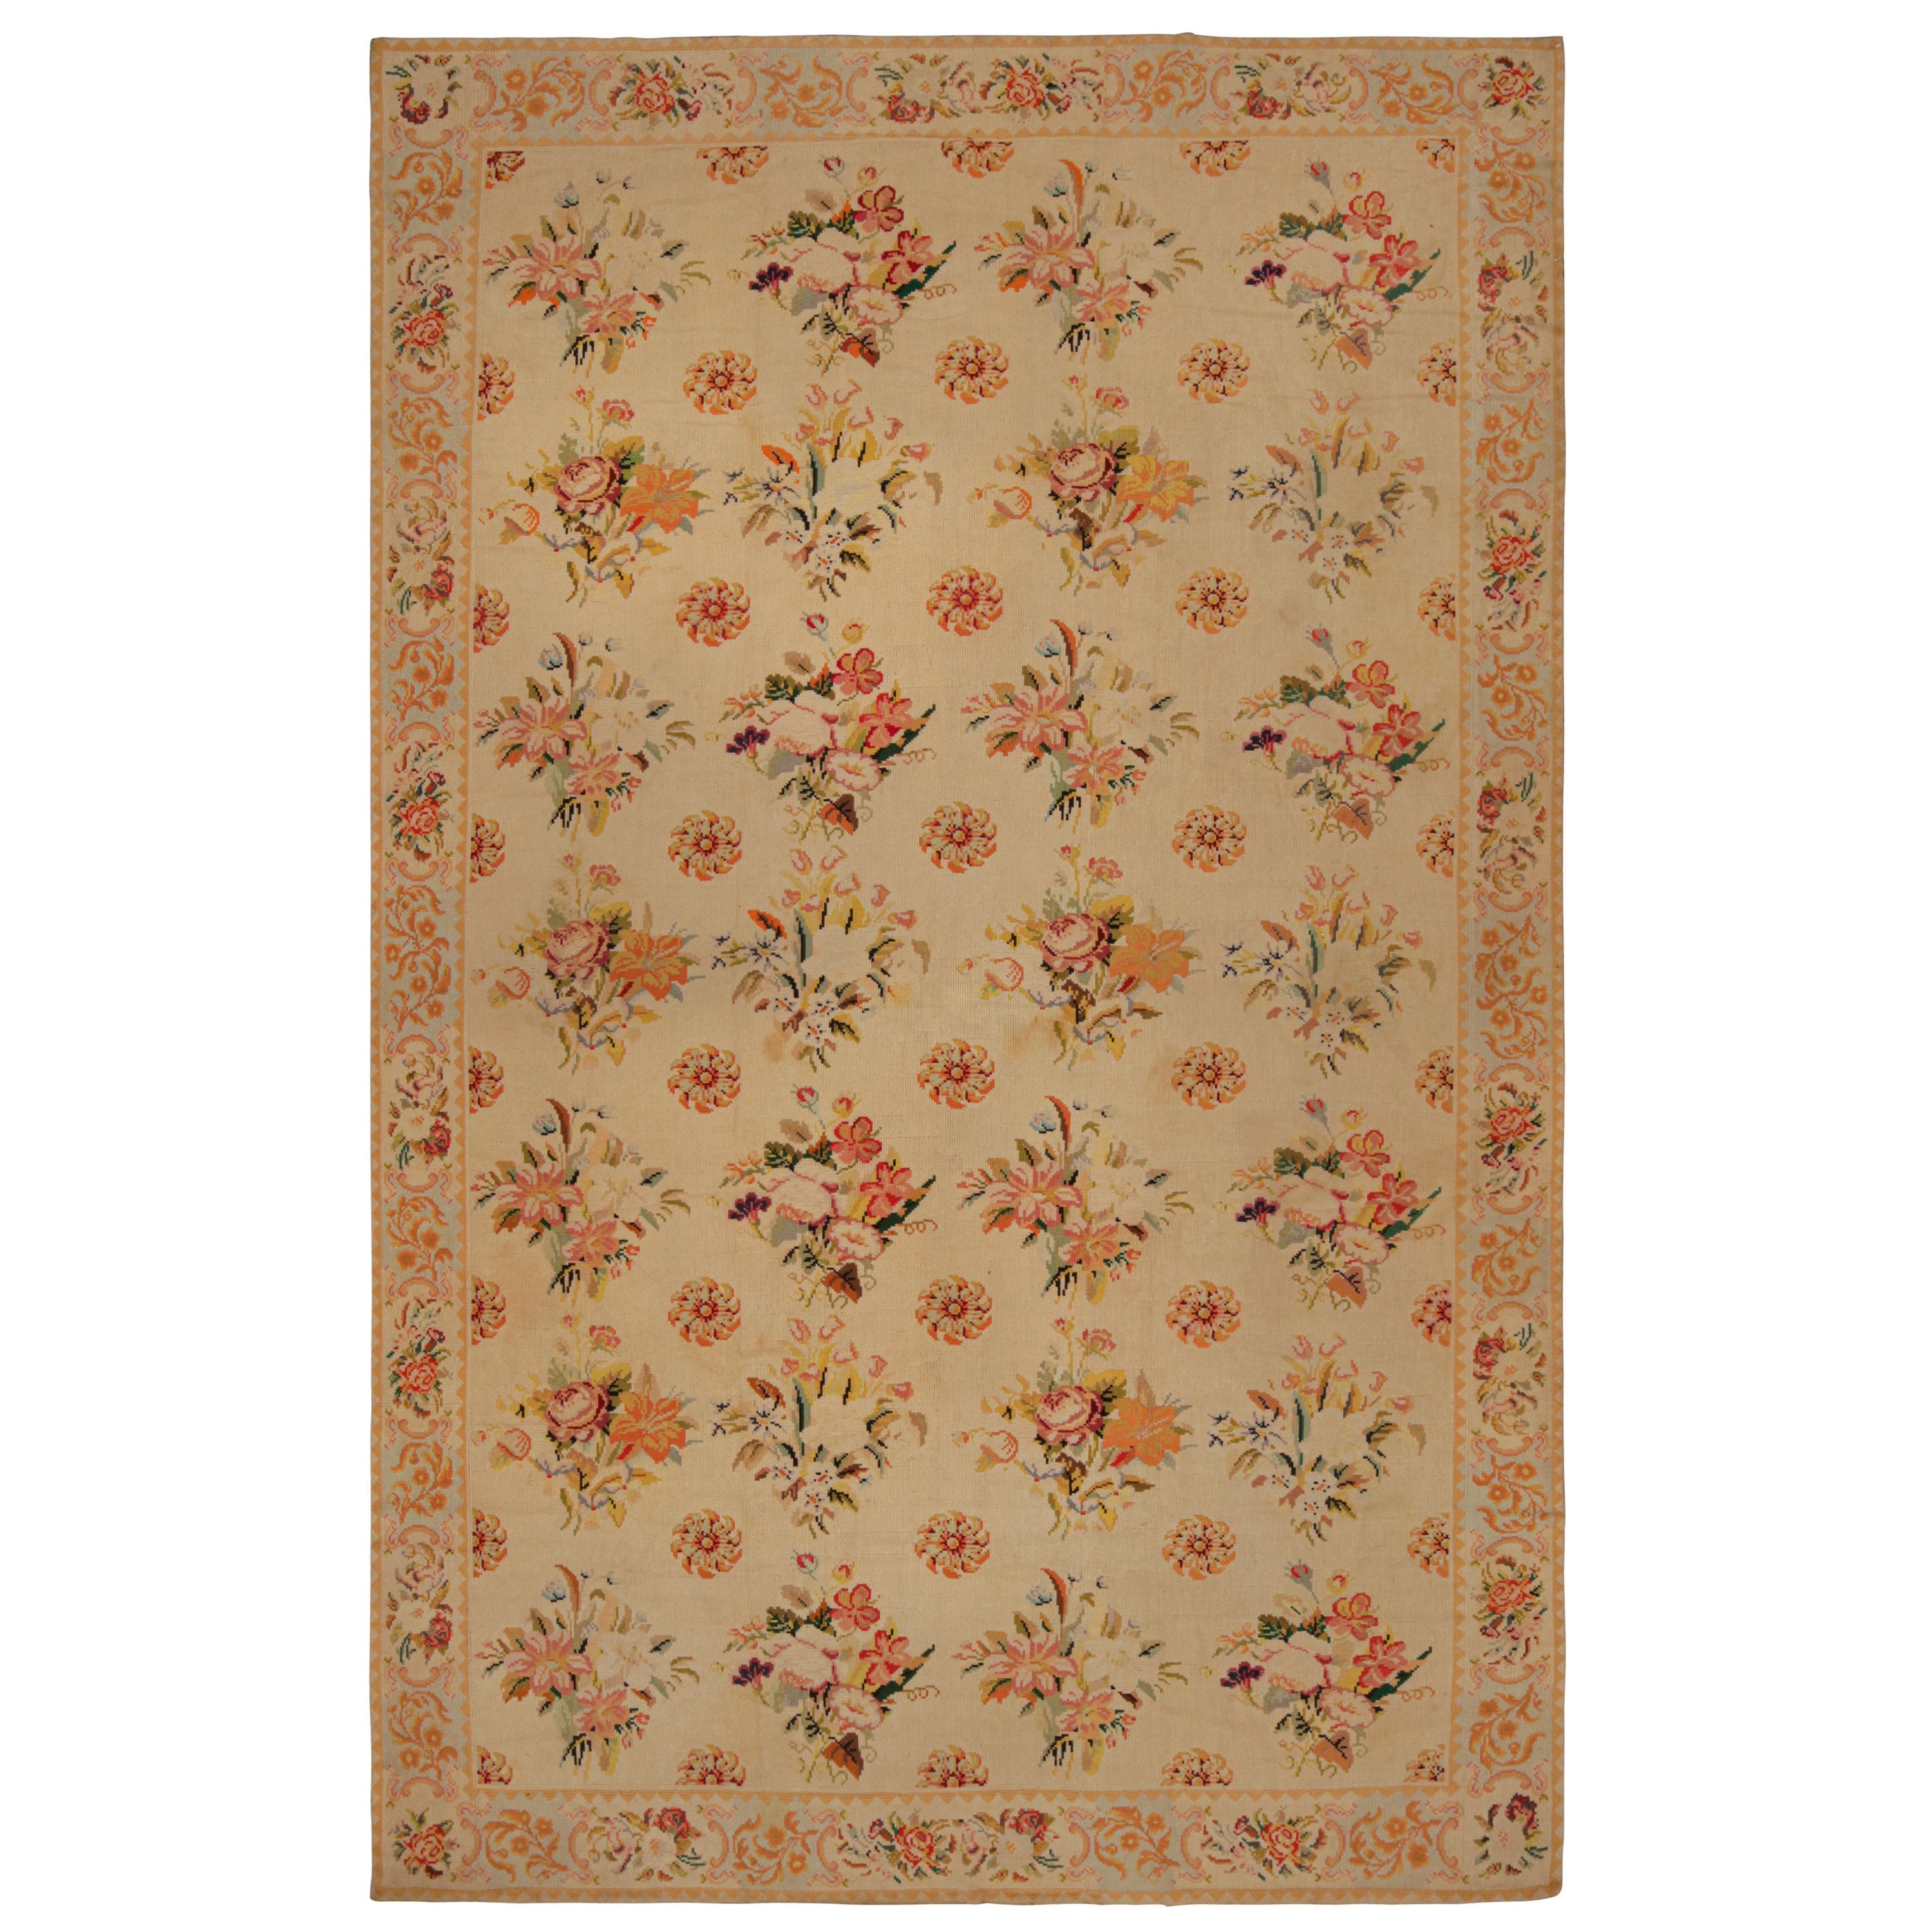 Antique French Needlepoint Rug in Beige with Floral Patterns, from Rug & Kilim For Sale